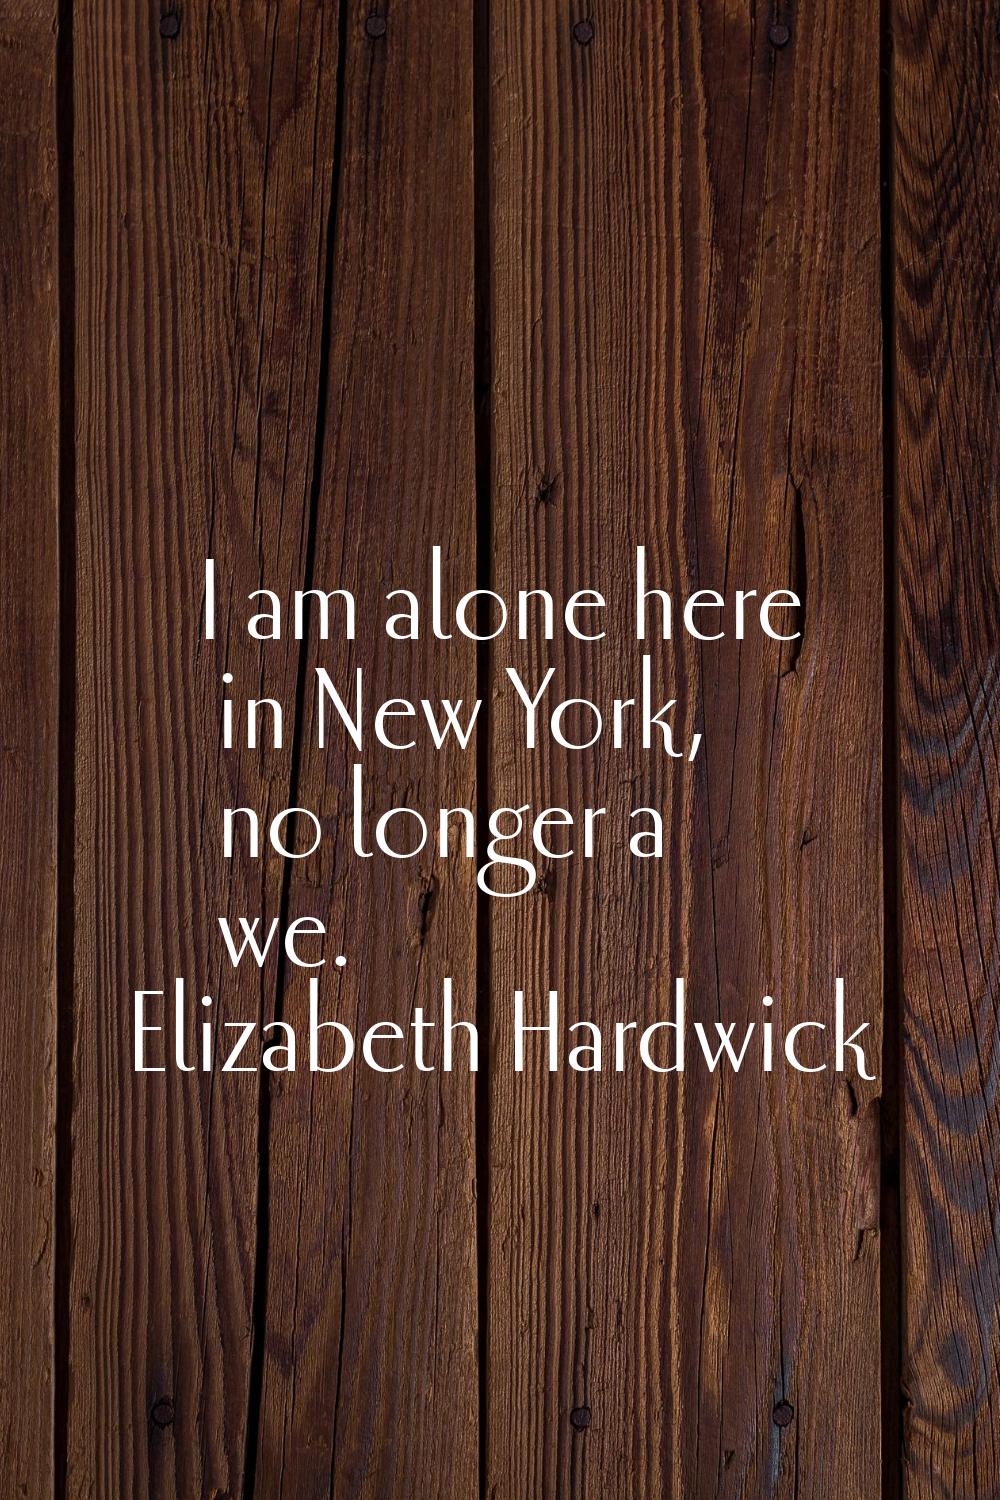 I am alone here in New York, no longer a we.